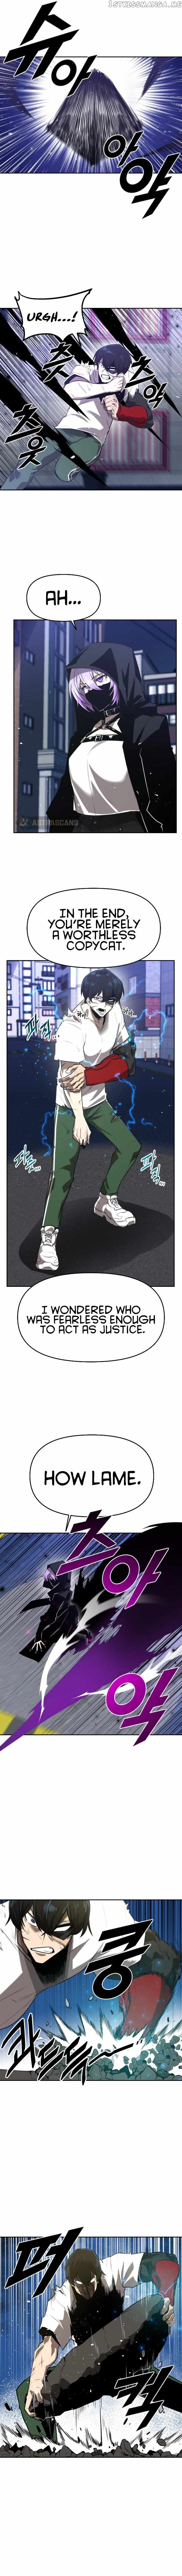 Rental Hero Chapter 2 - page 16